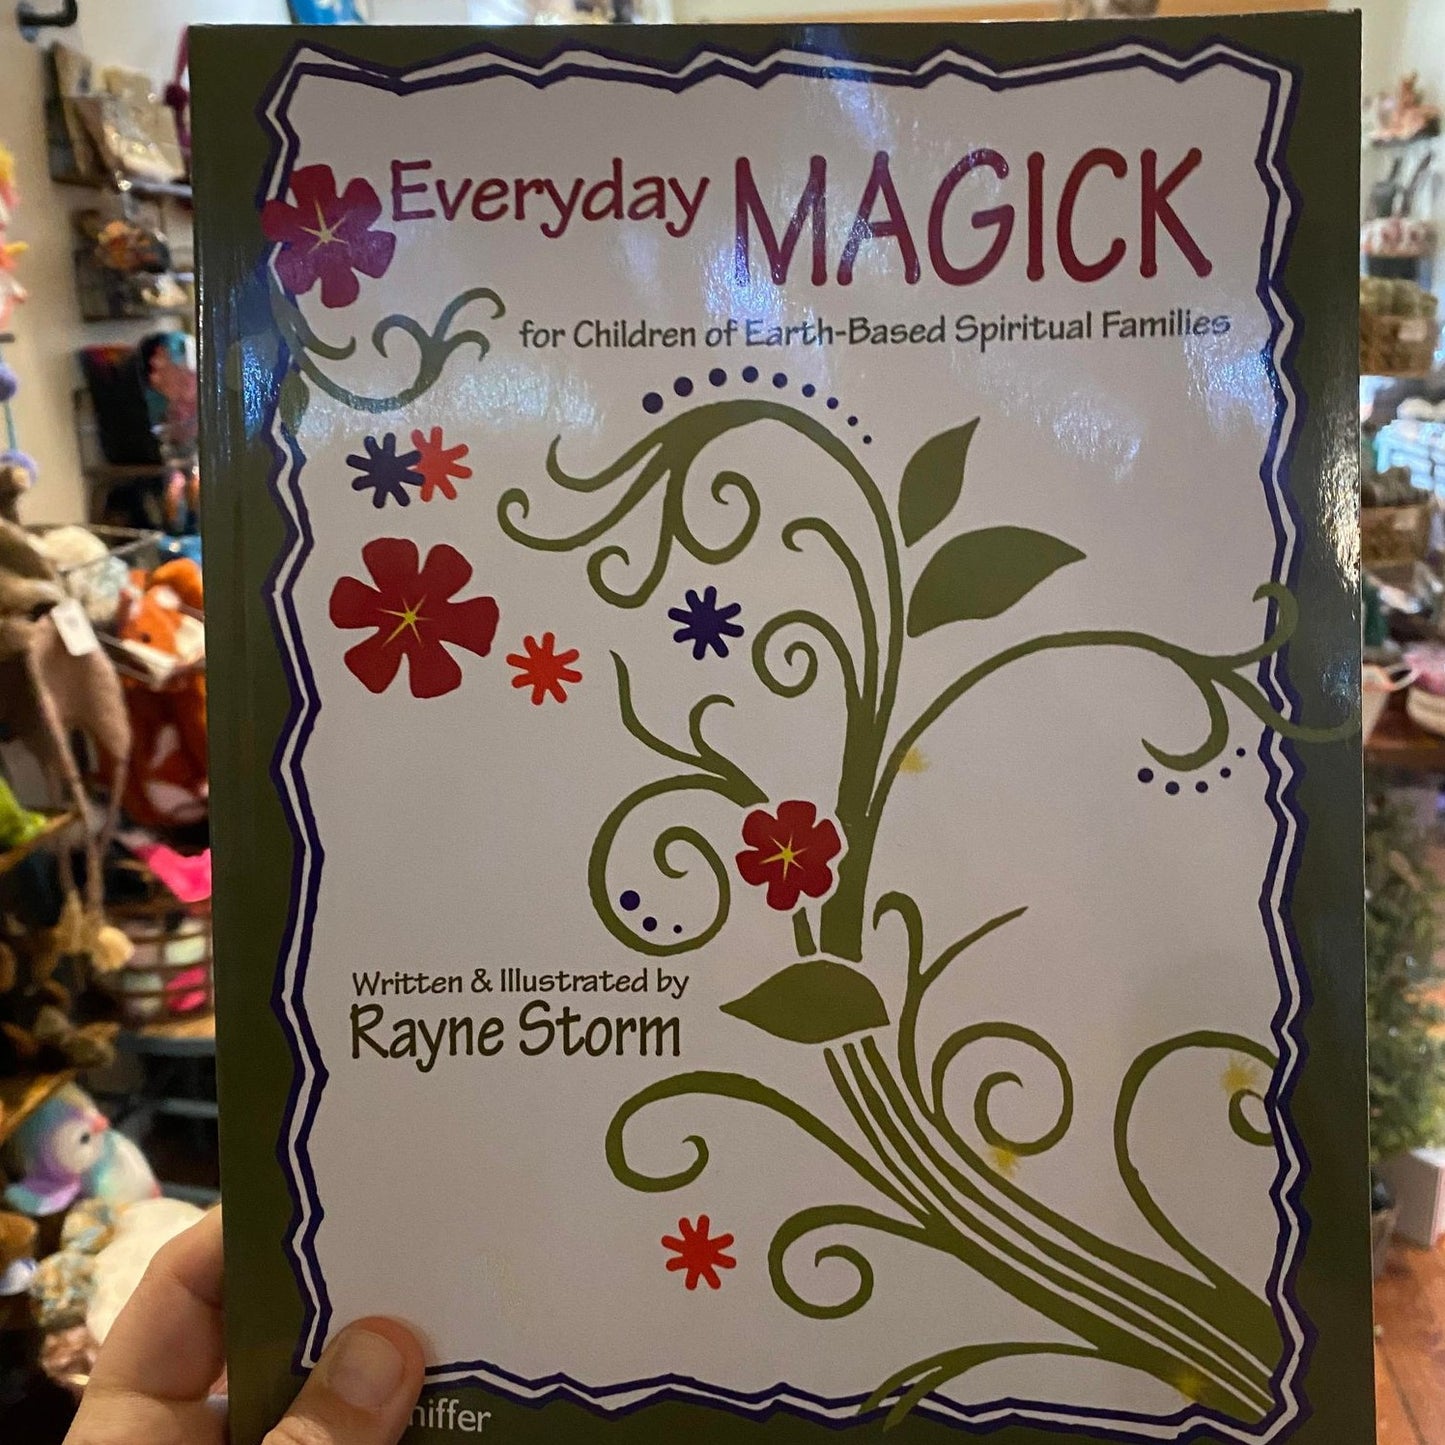 Everyday MAGICK for Children of Earth-Based Spiritual Book